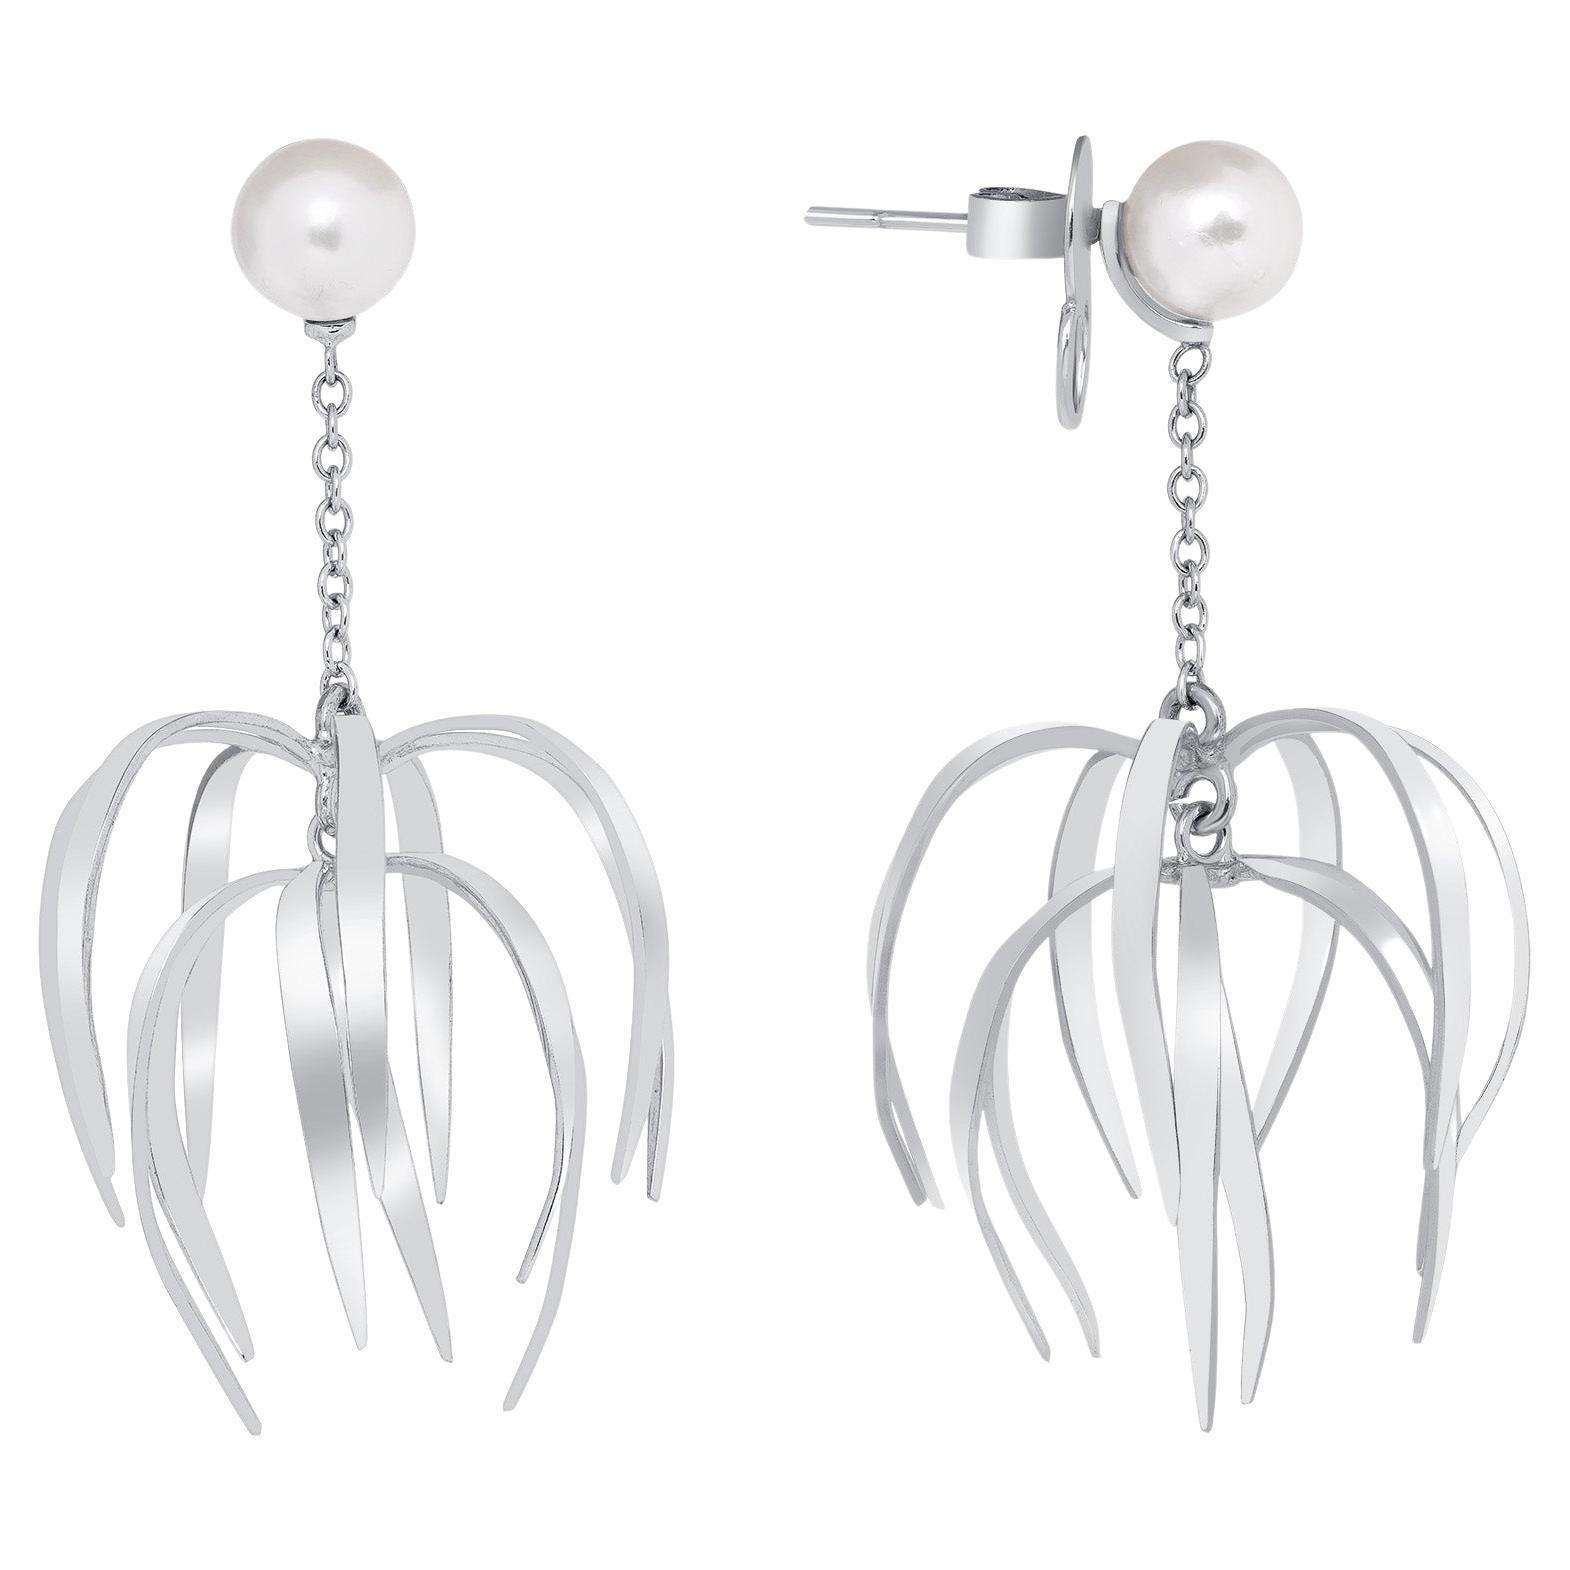 7 Millimeter Matching South Sea Pearl White Gold Chandelier Earrings For Sale